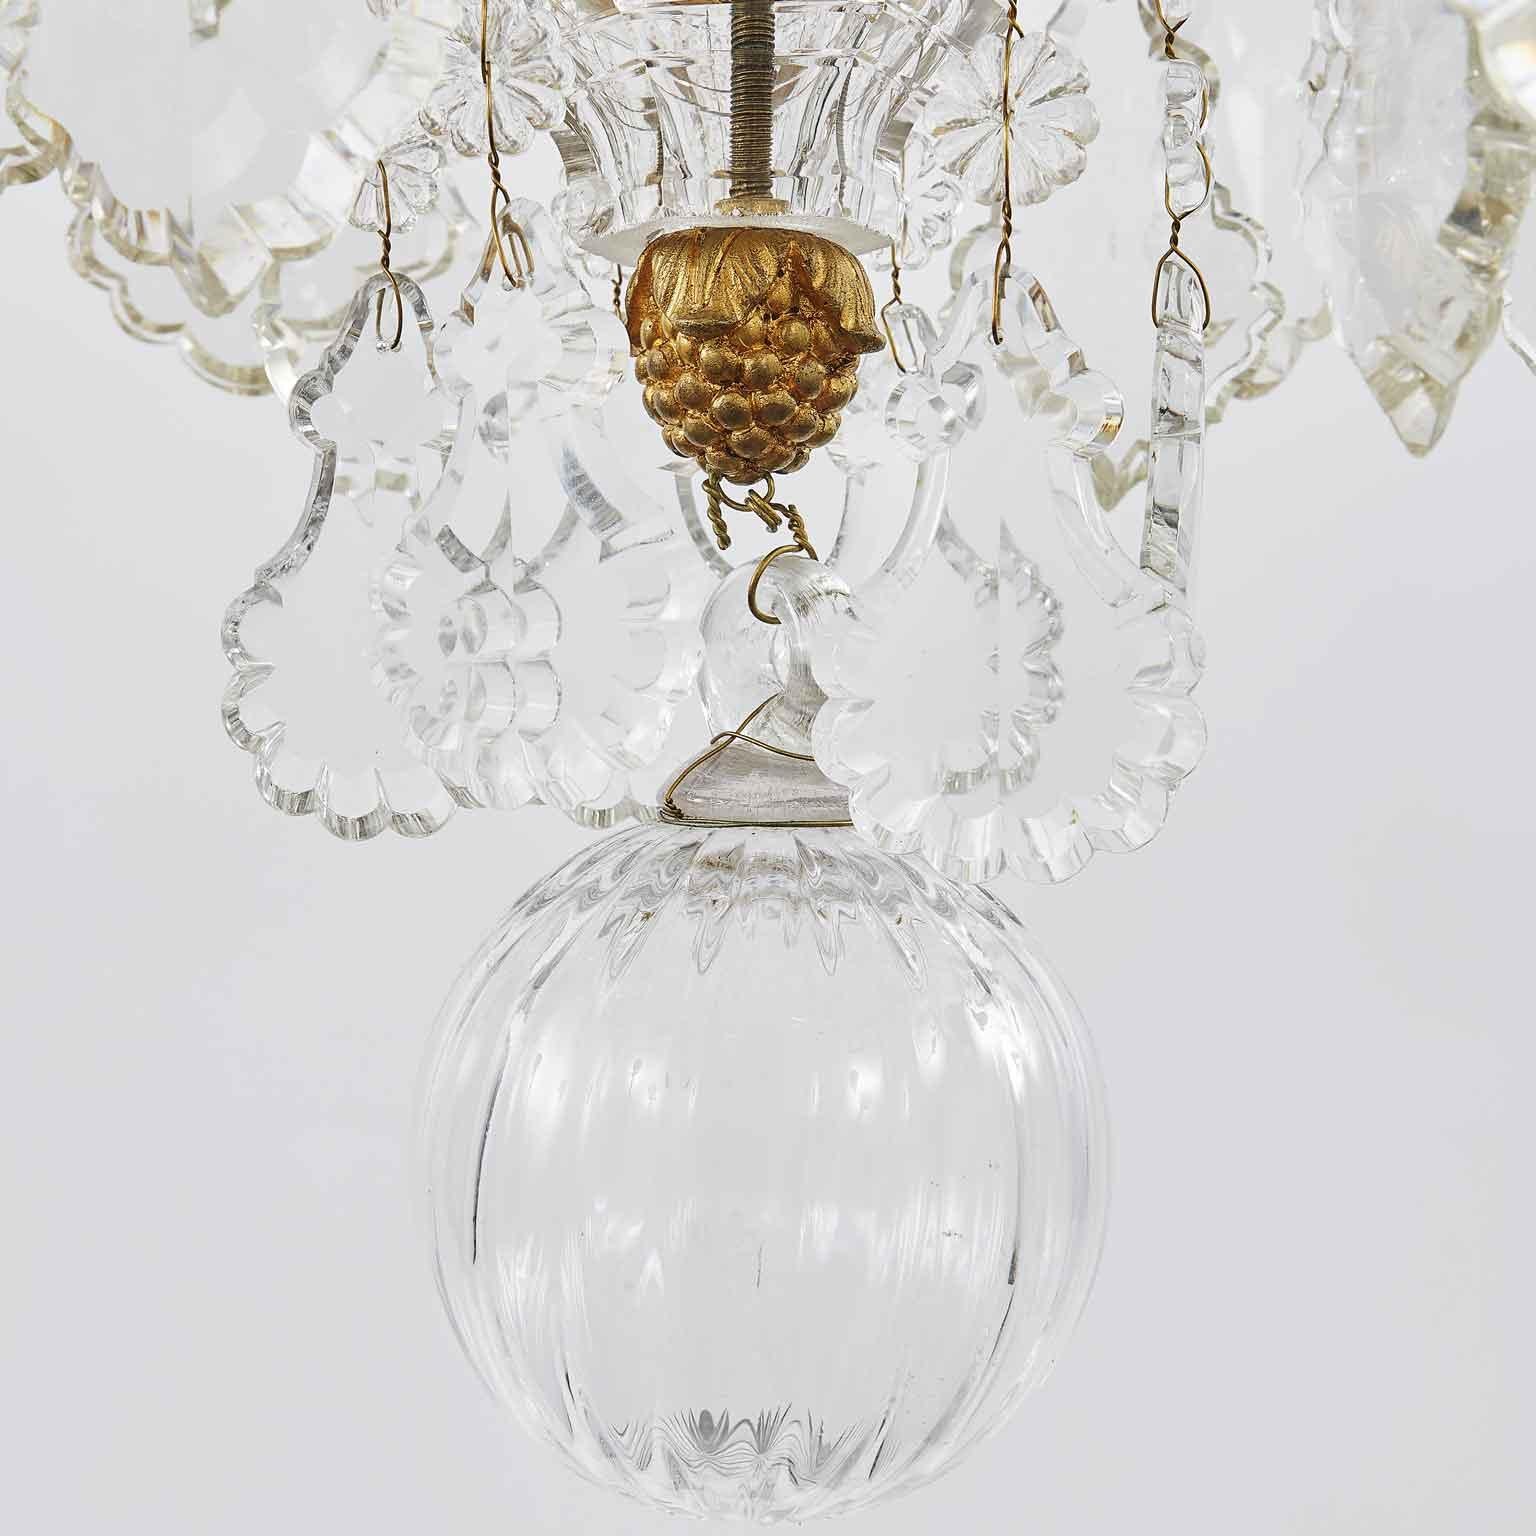 Early 20th Century French Birdcage Chandelier Ormolu with Crystal Spires For Sale 2